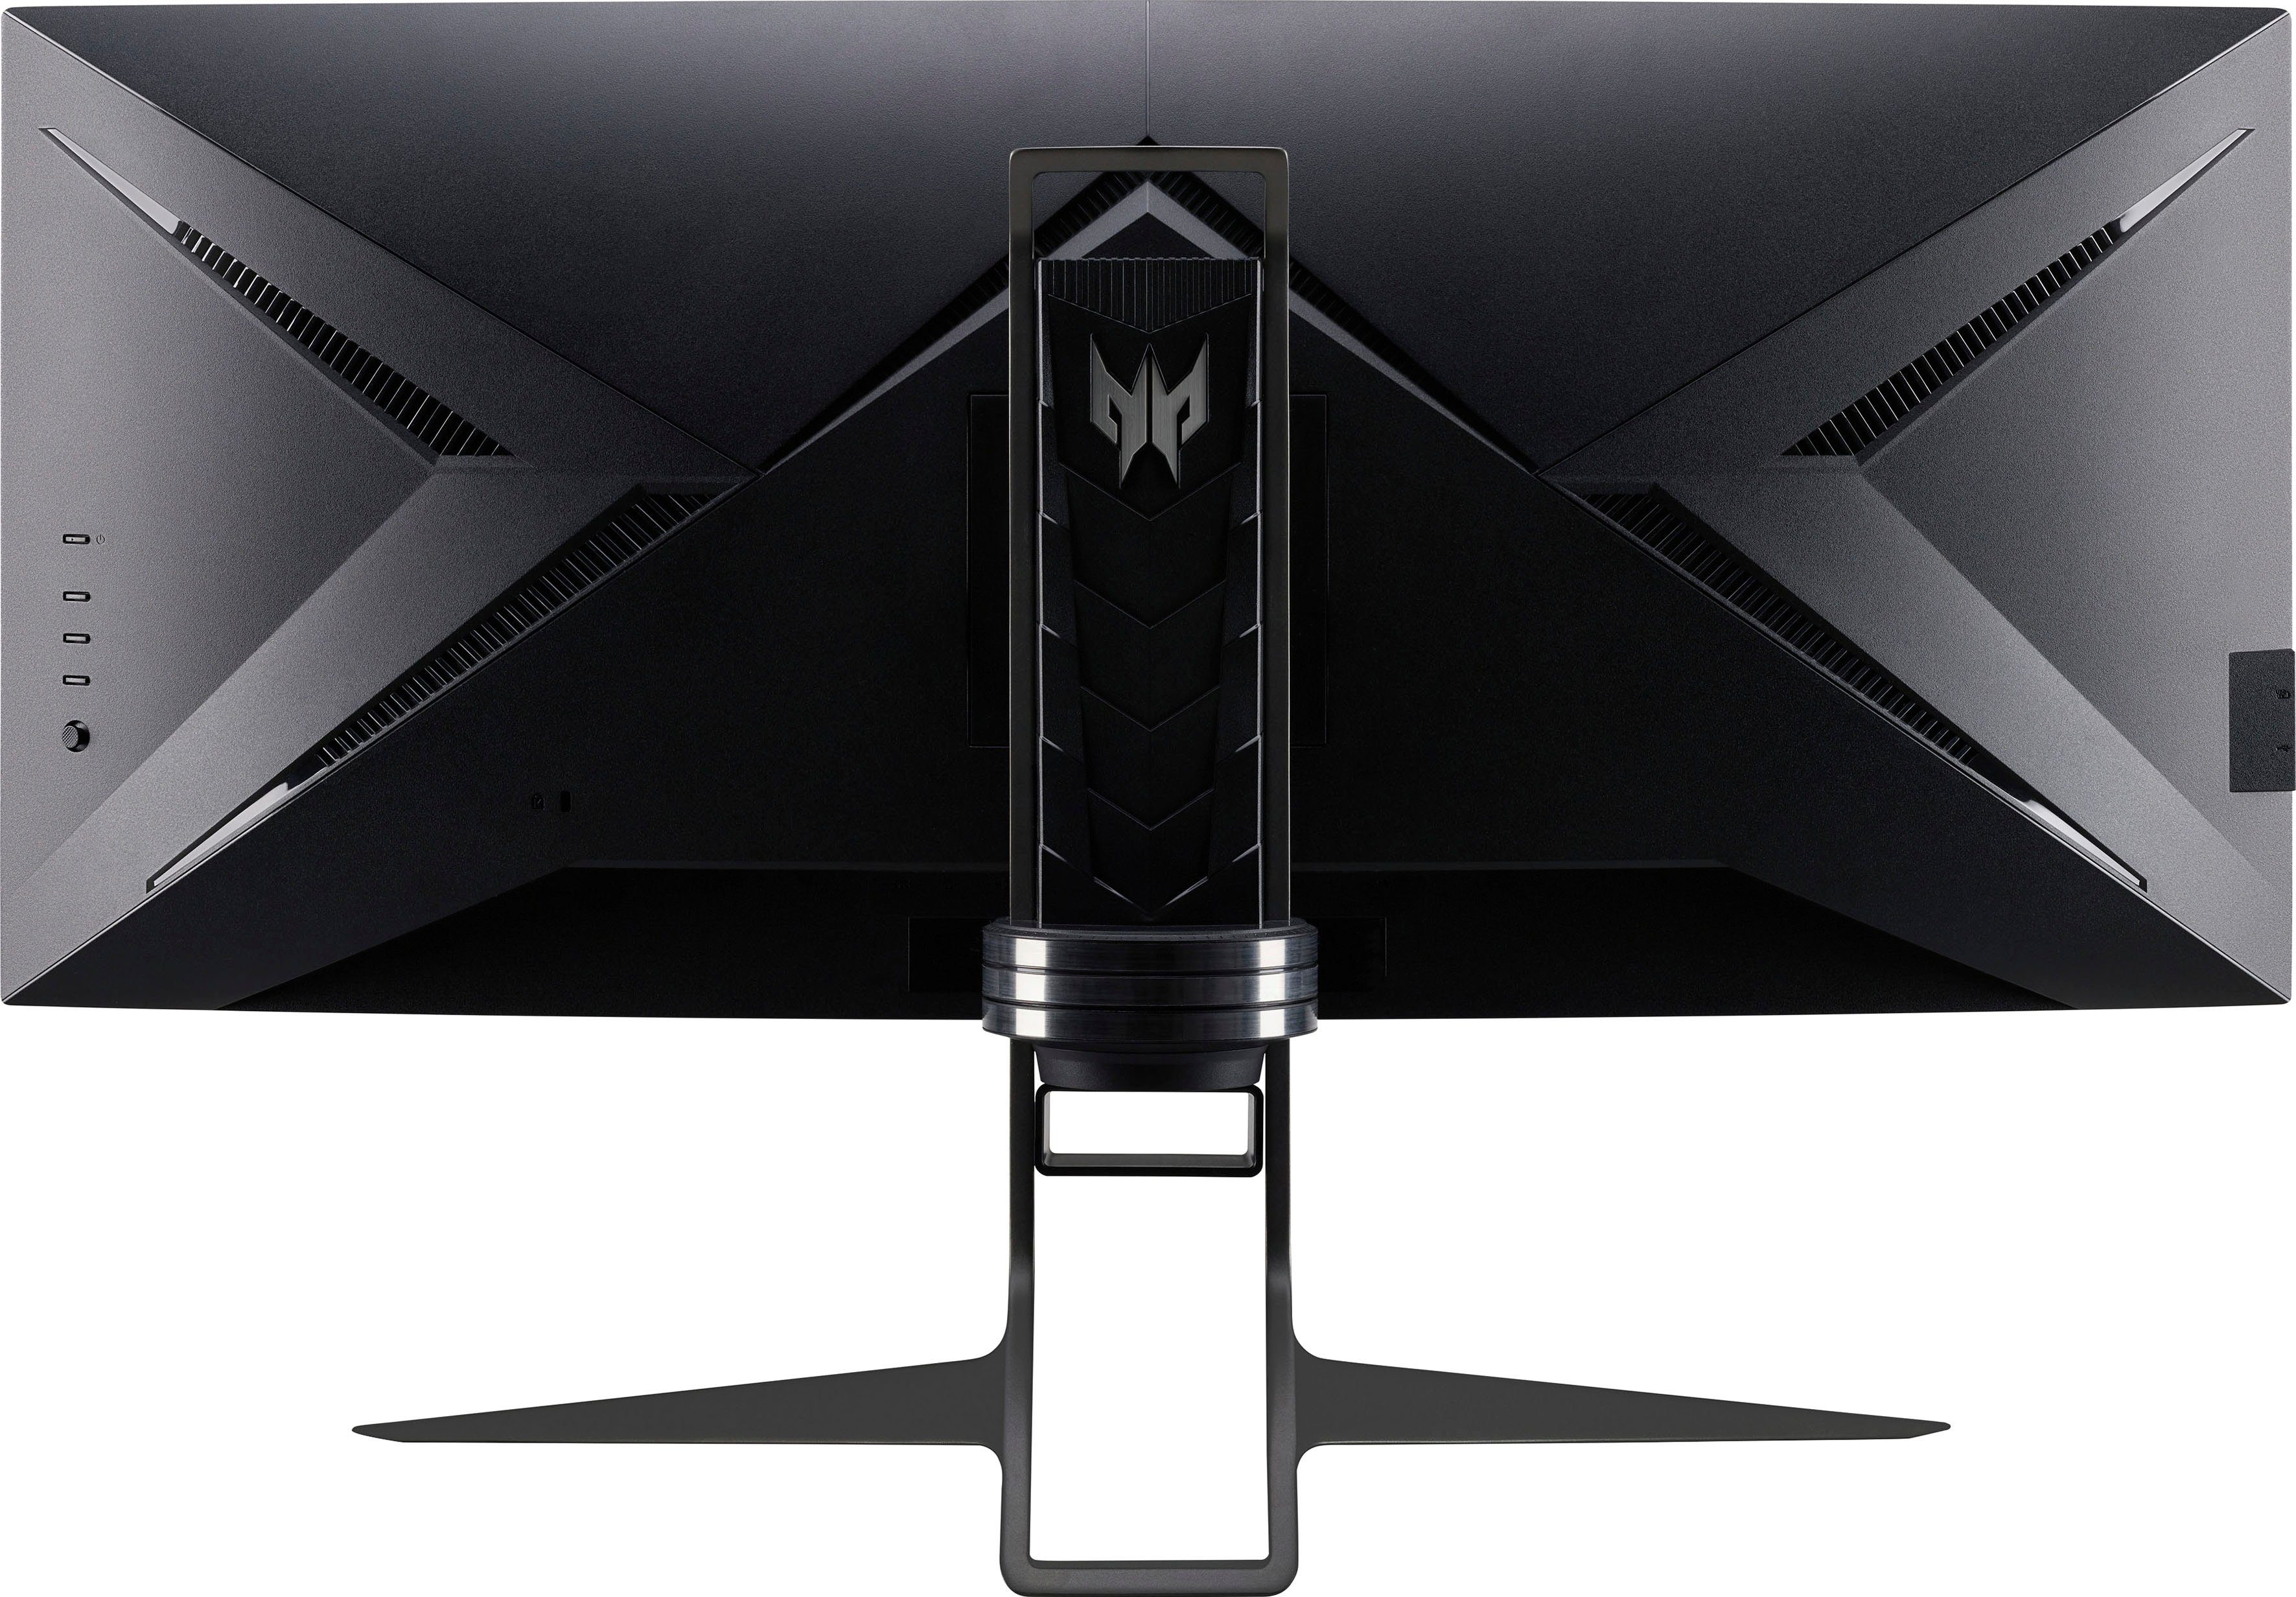 px, 0,5 ms (86,4 IPS-LED) 1440 Acer X34GS x ", 180 Hz, 3440 Curved-Gaming-LED-Monitor cm/34 Reaktionszeit, Predator